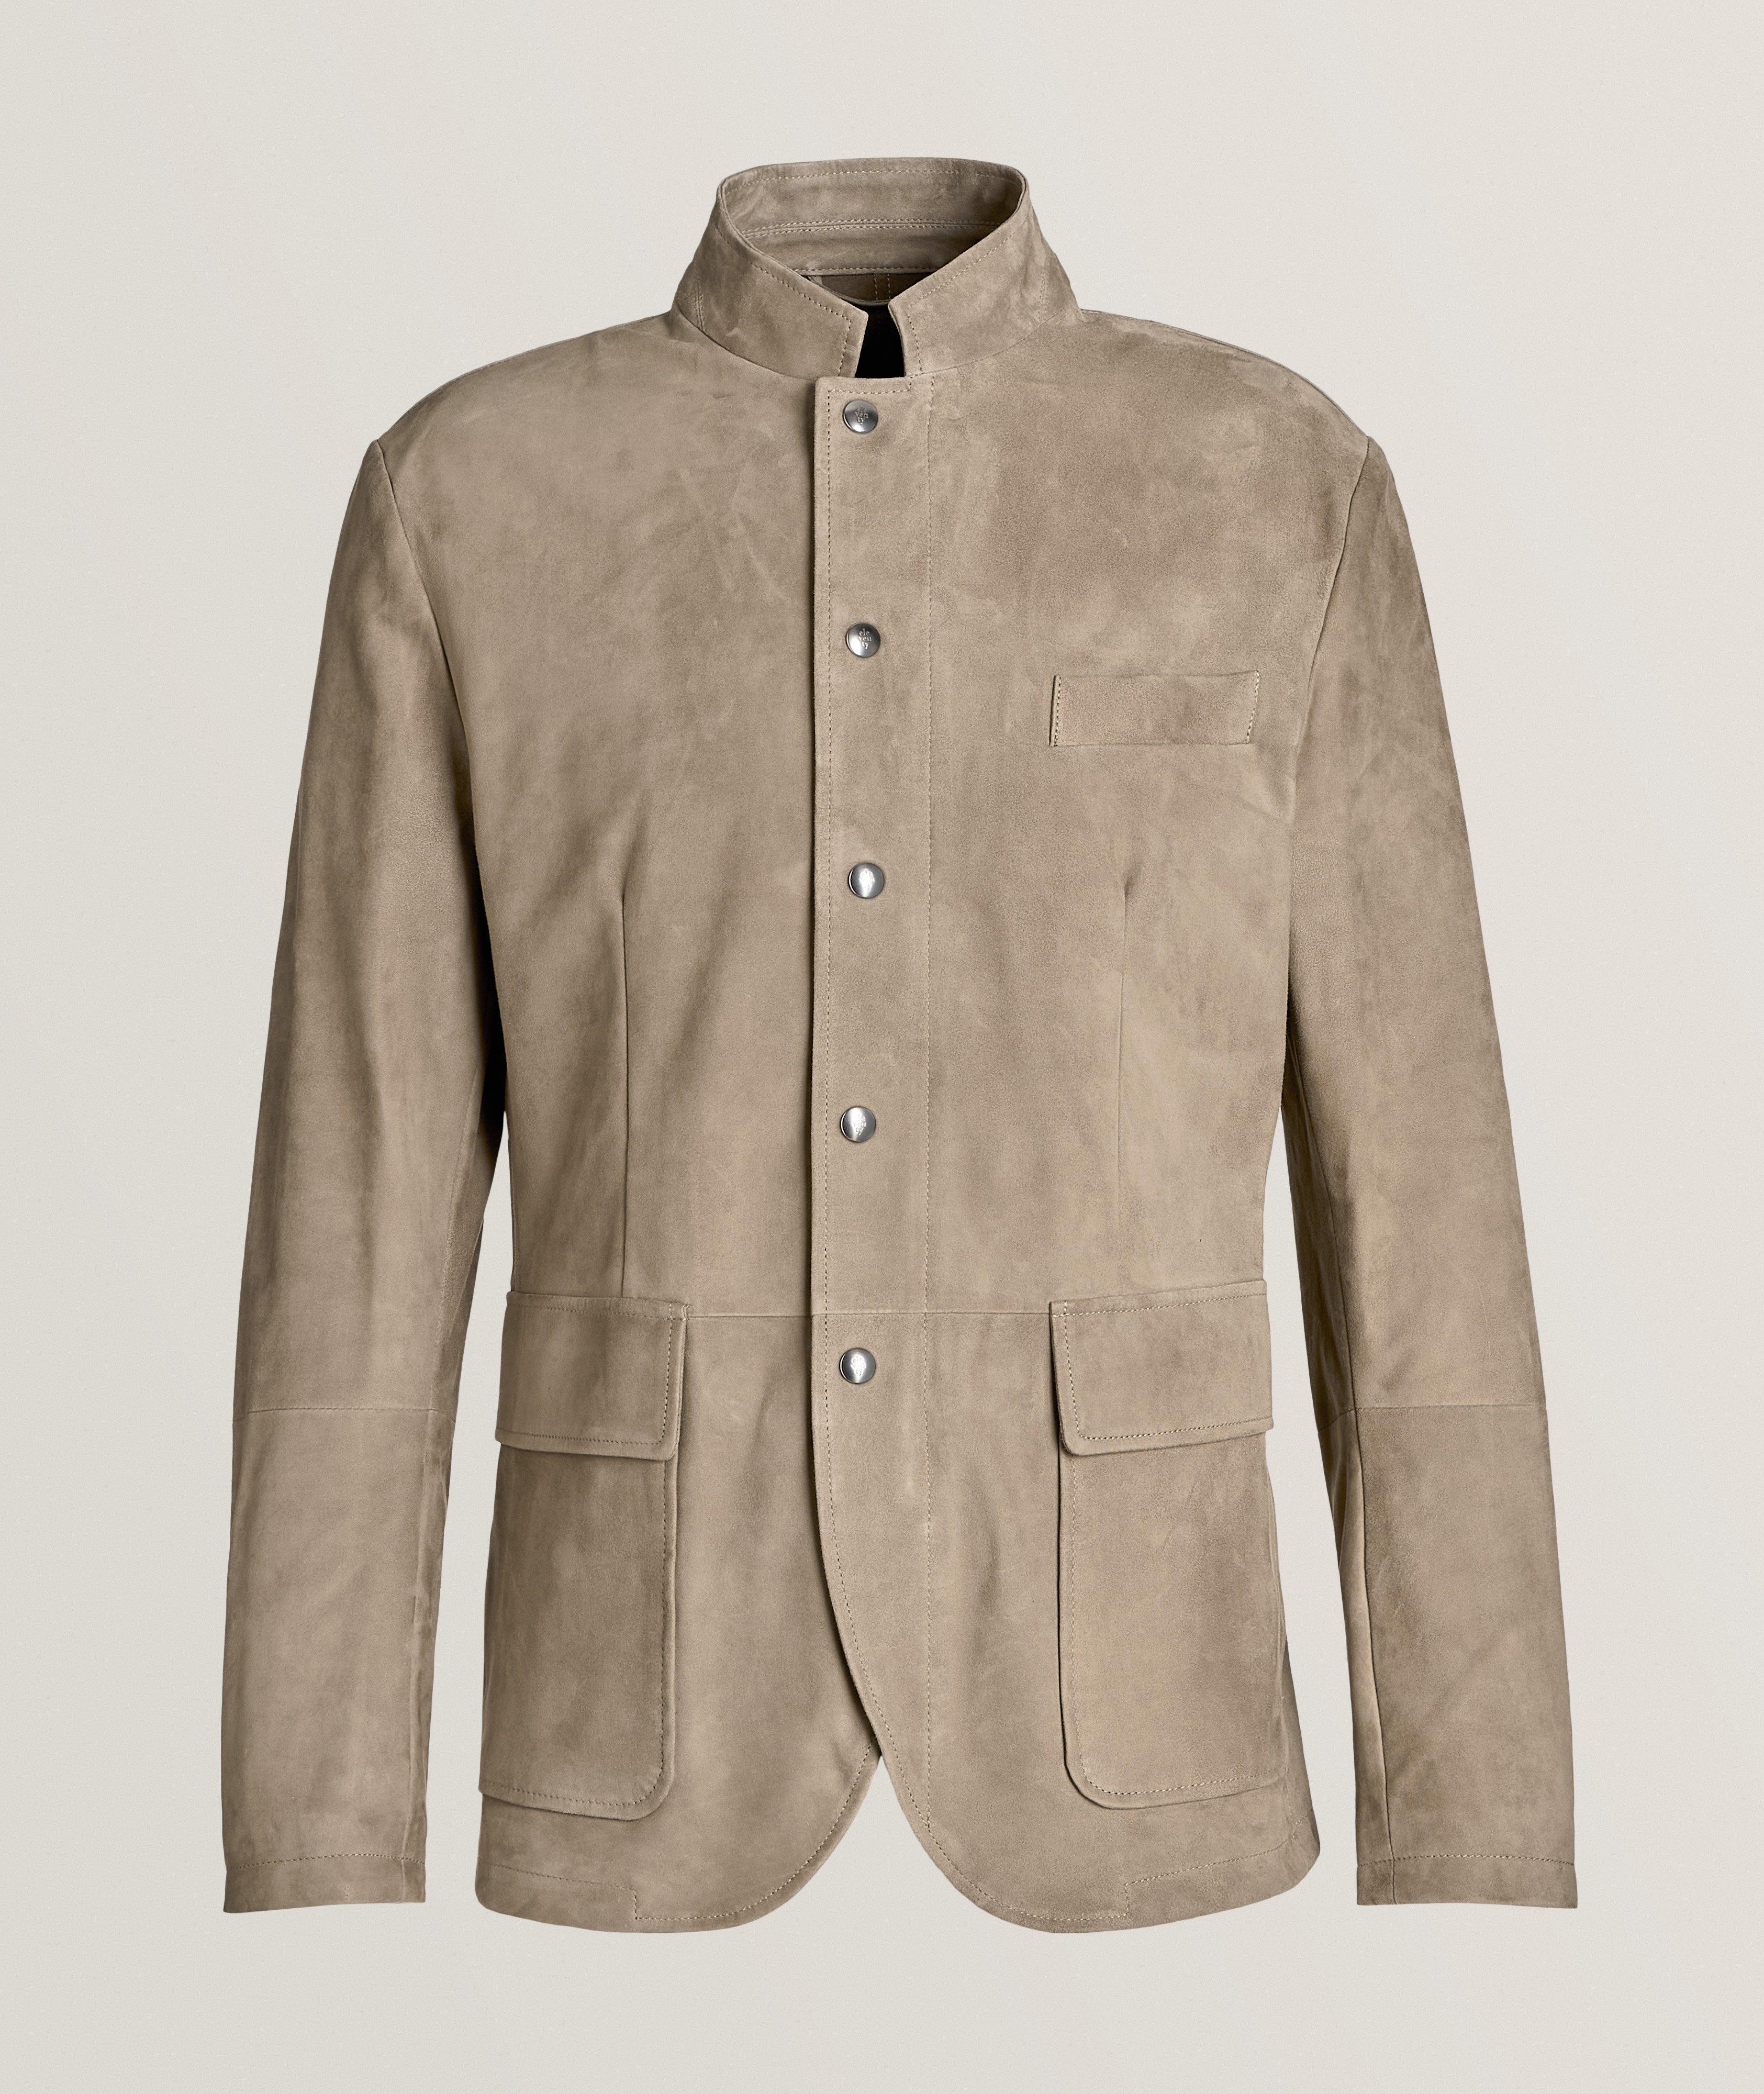 Platinum Collection Suede Field Jacket image 0